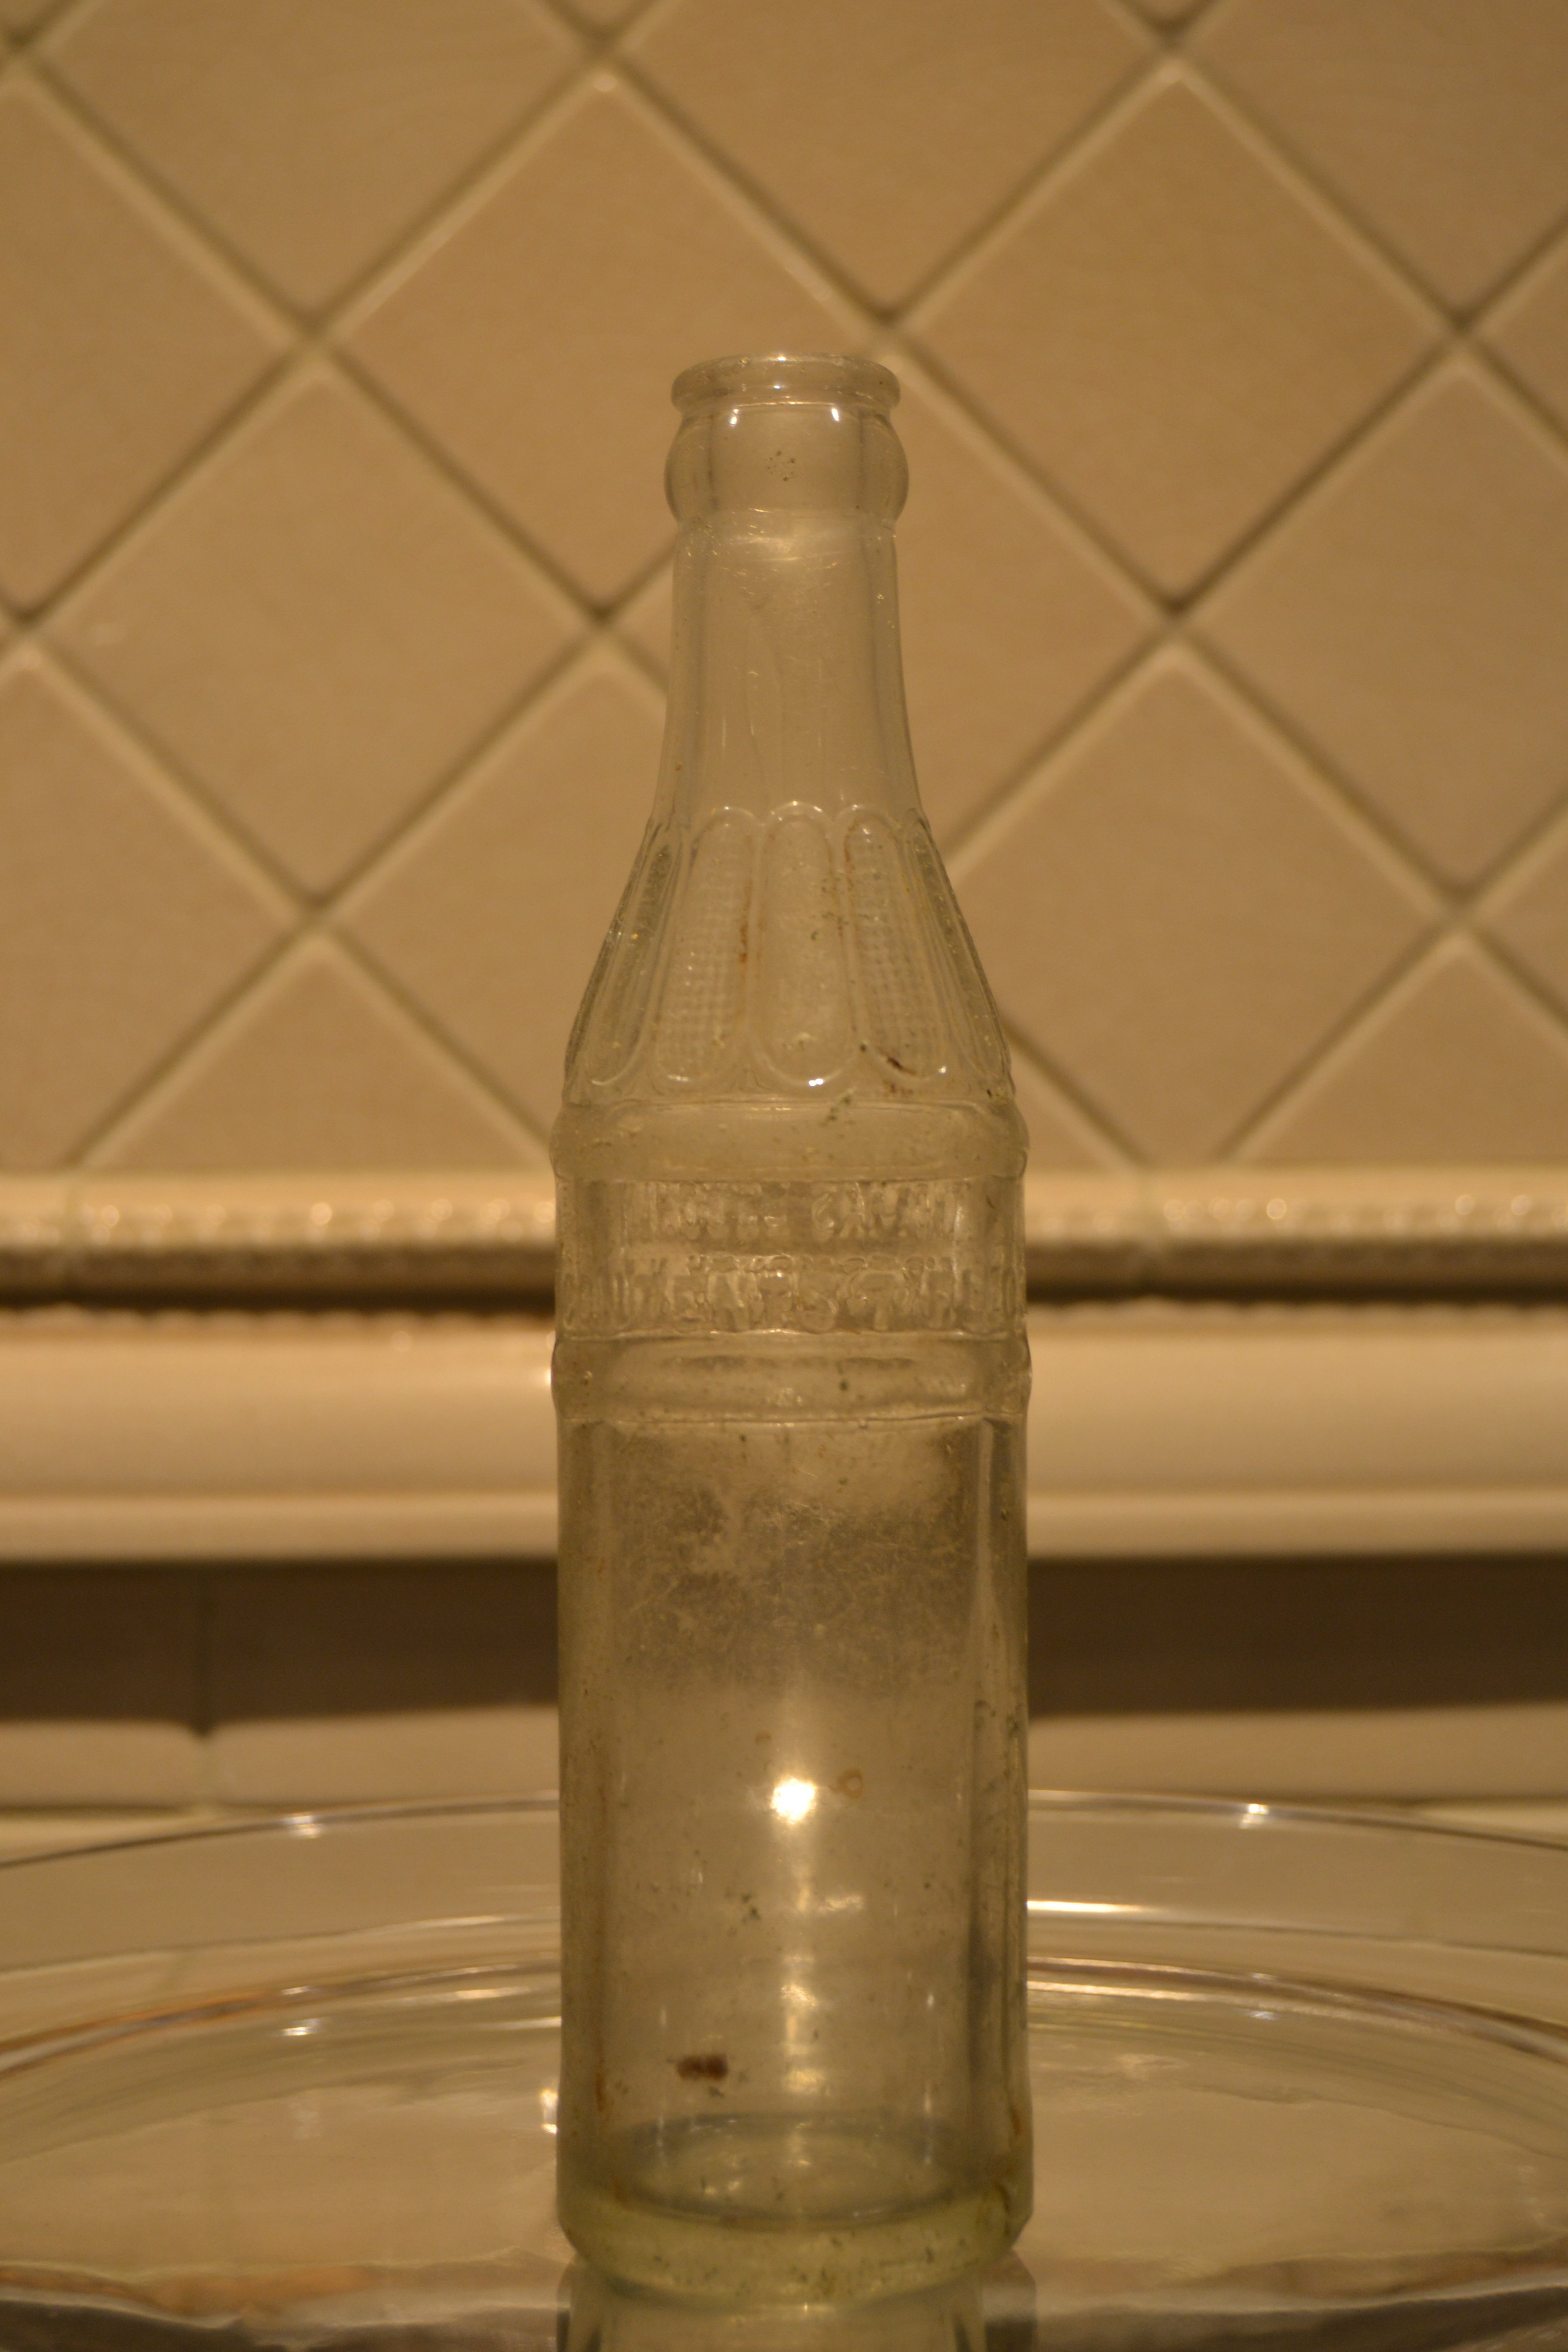 Antique Thomas Loughlin Portsmouth, NH Ale Bottle (C. 1900) For Sale! (+ Shipping & Handling) 3